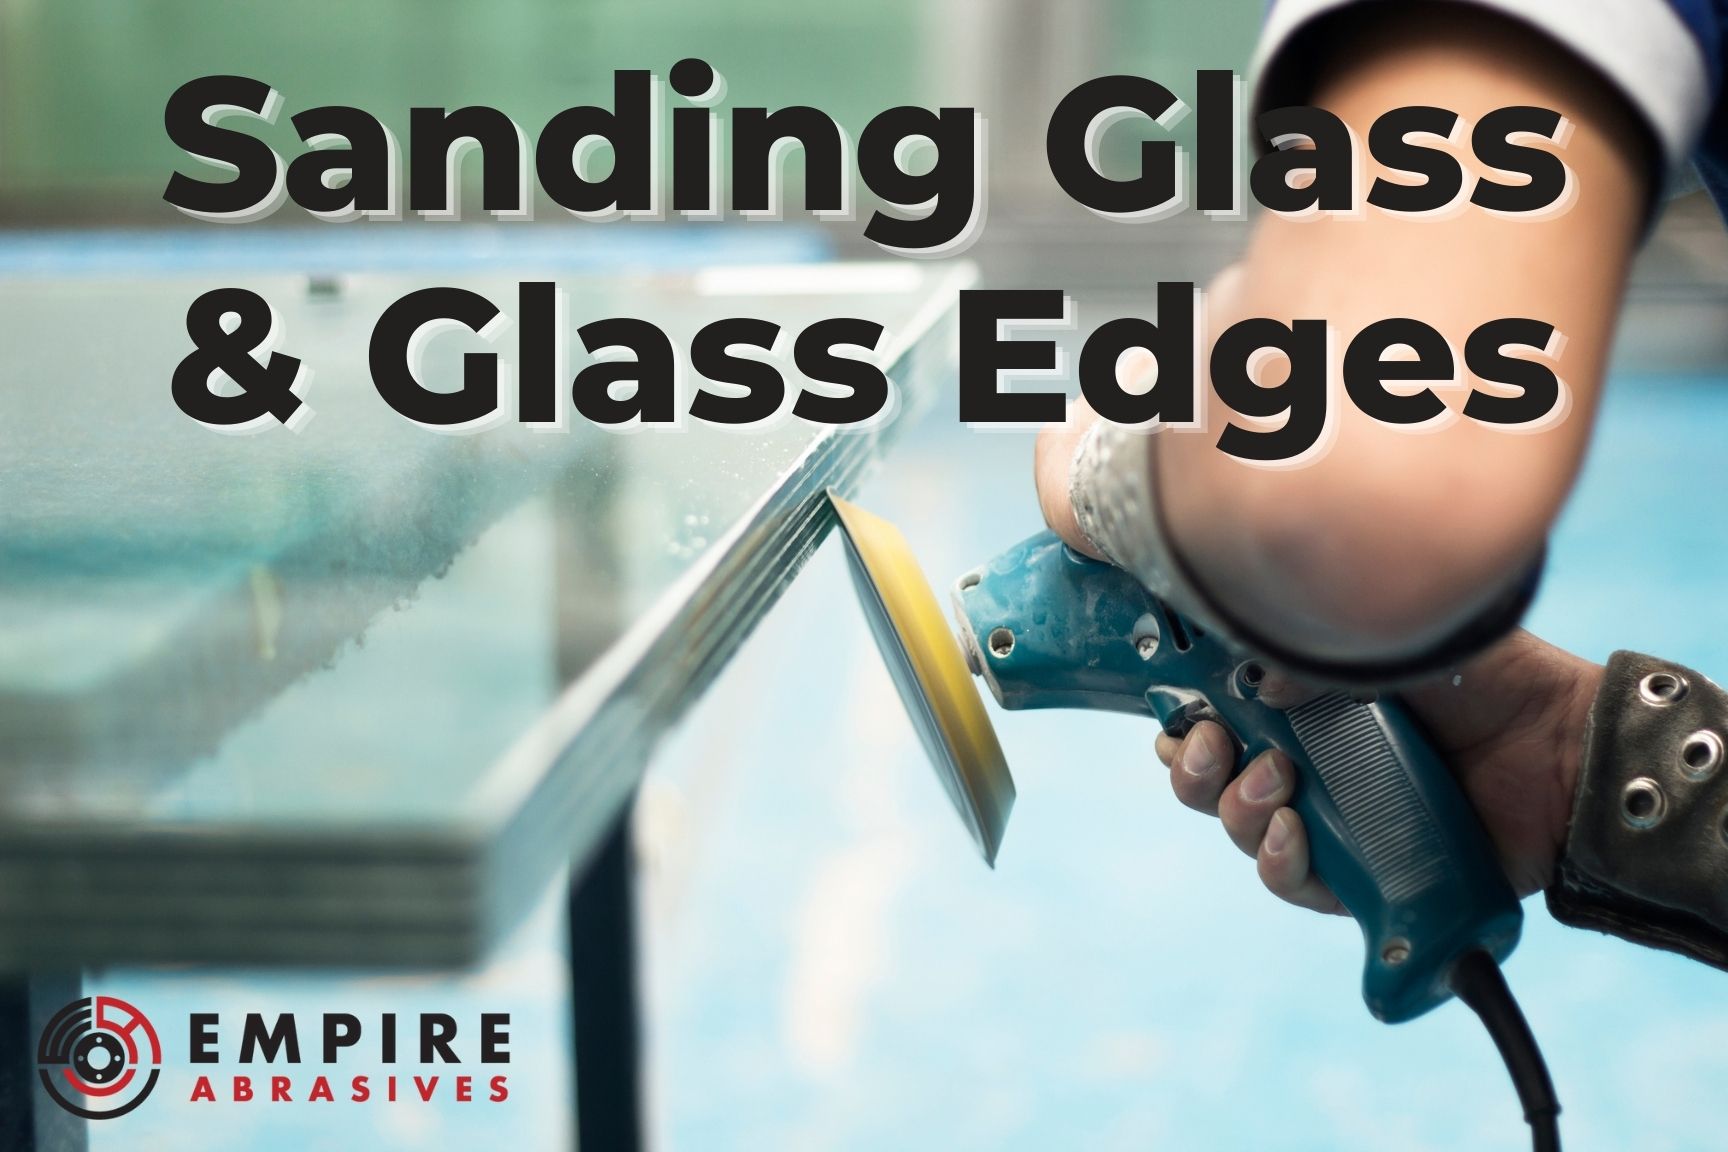 Sanding glass edges by hand